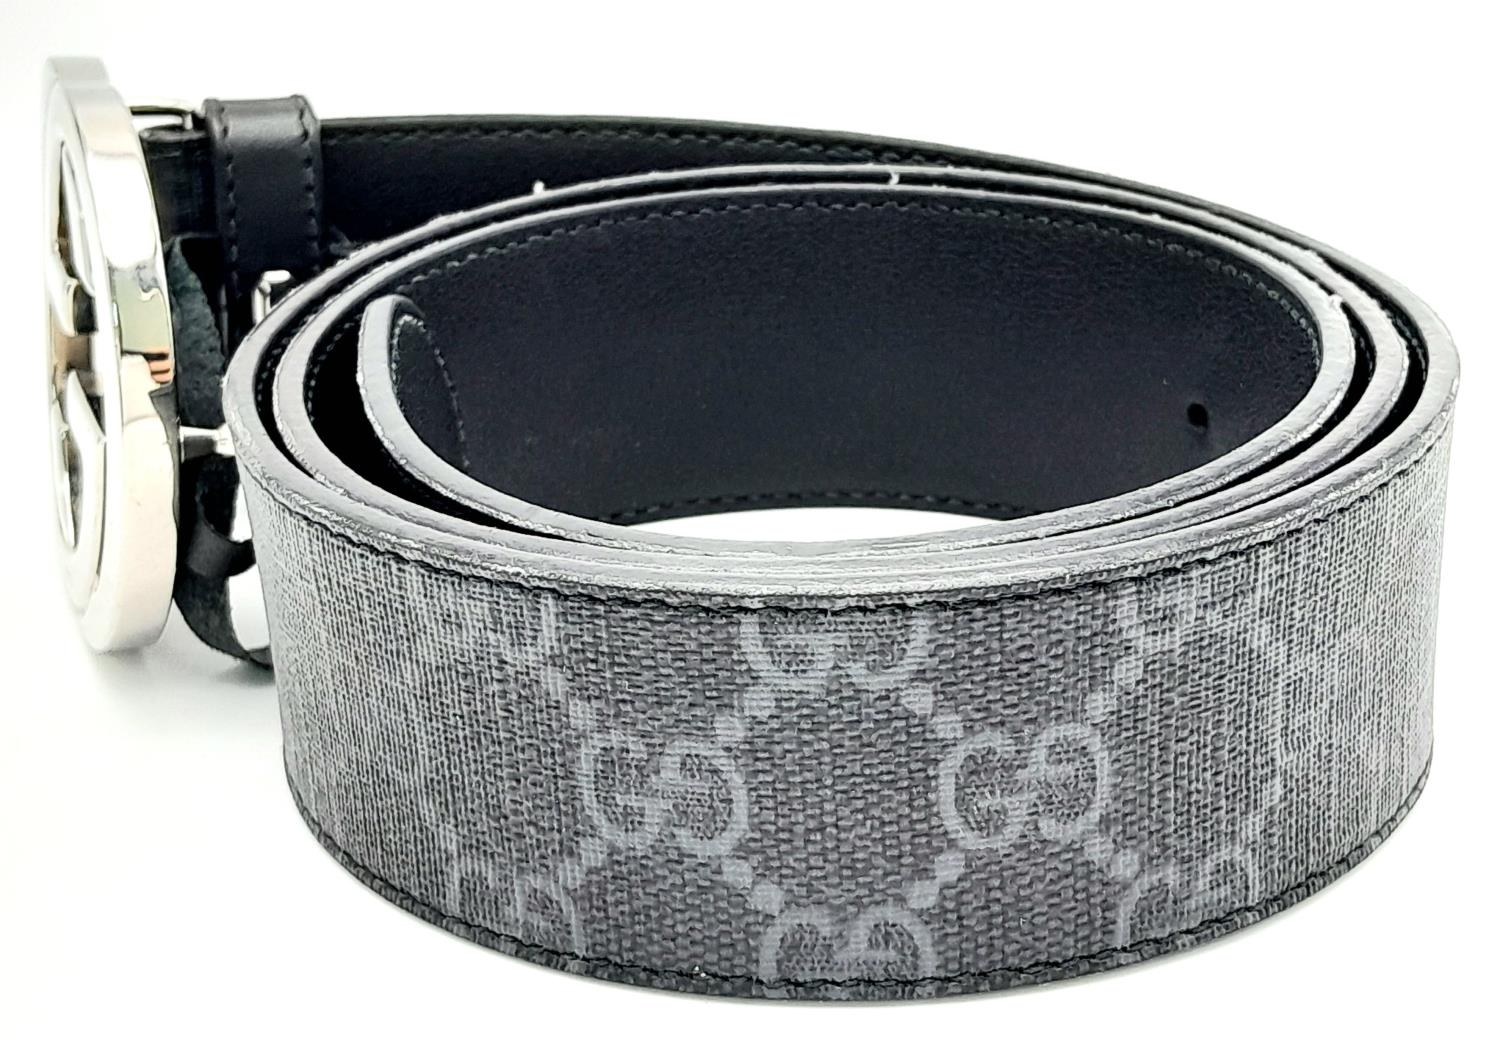 A Gucci Black with Grey Monogram Men's GG Belt. Silver-toned hardware. Approximately 104.5cm length, - Image 3 of 7